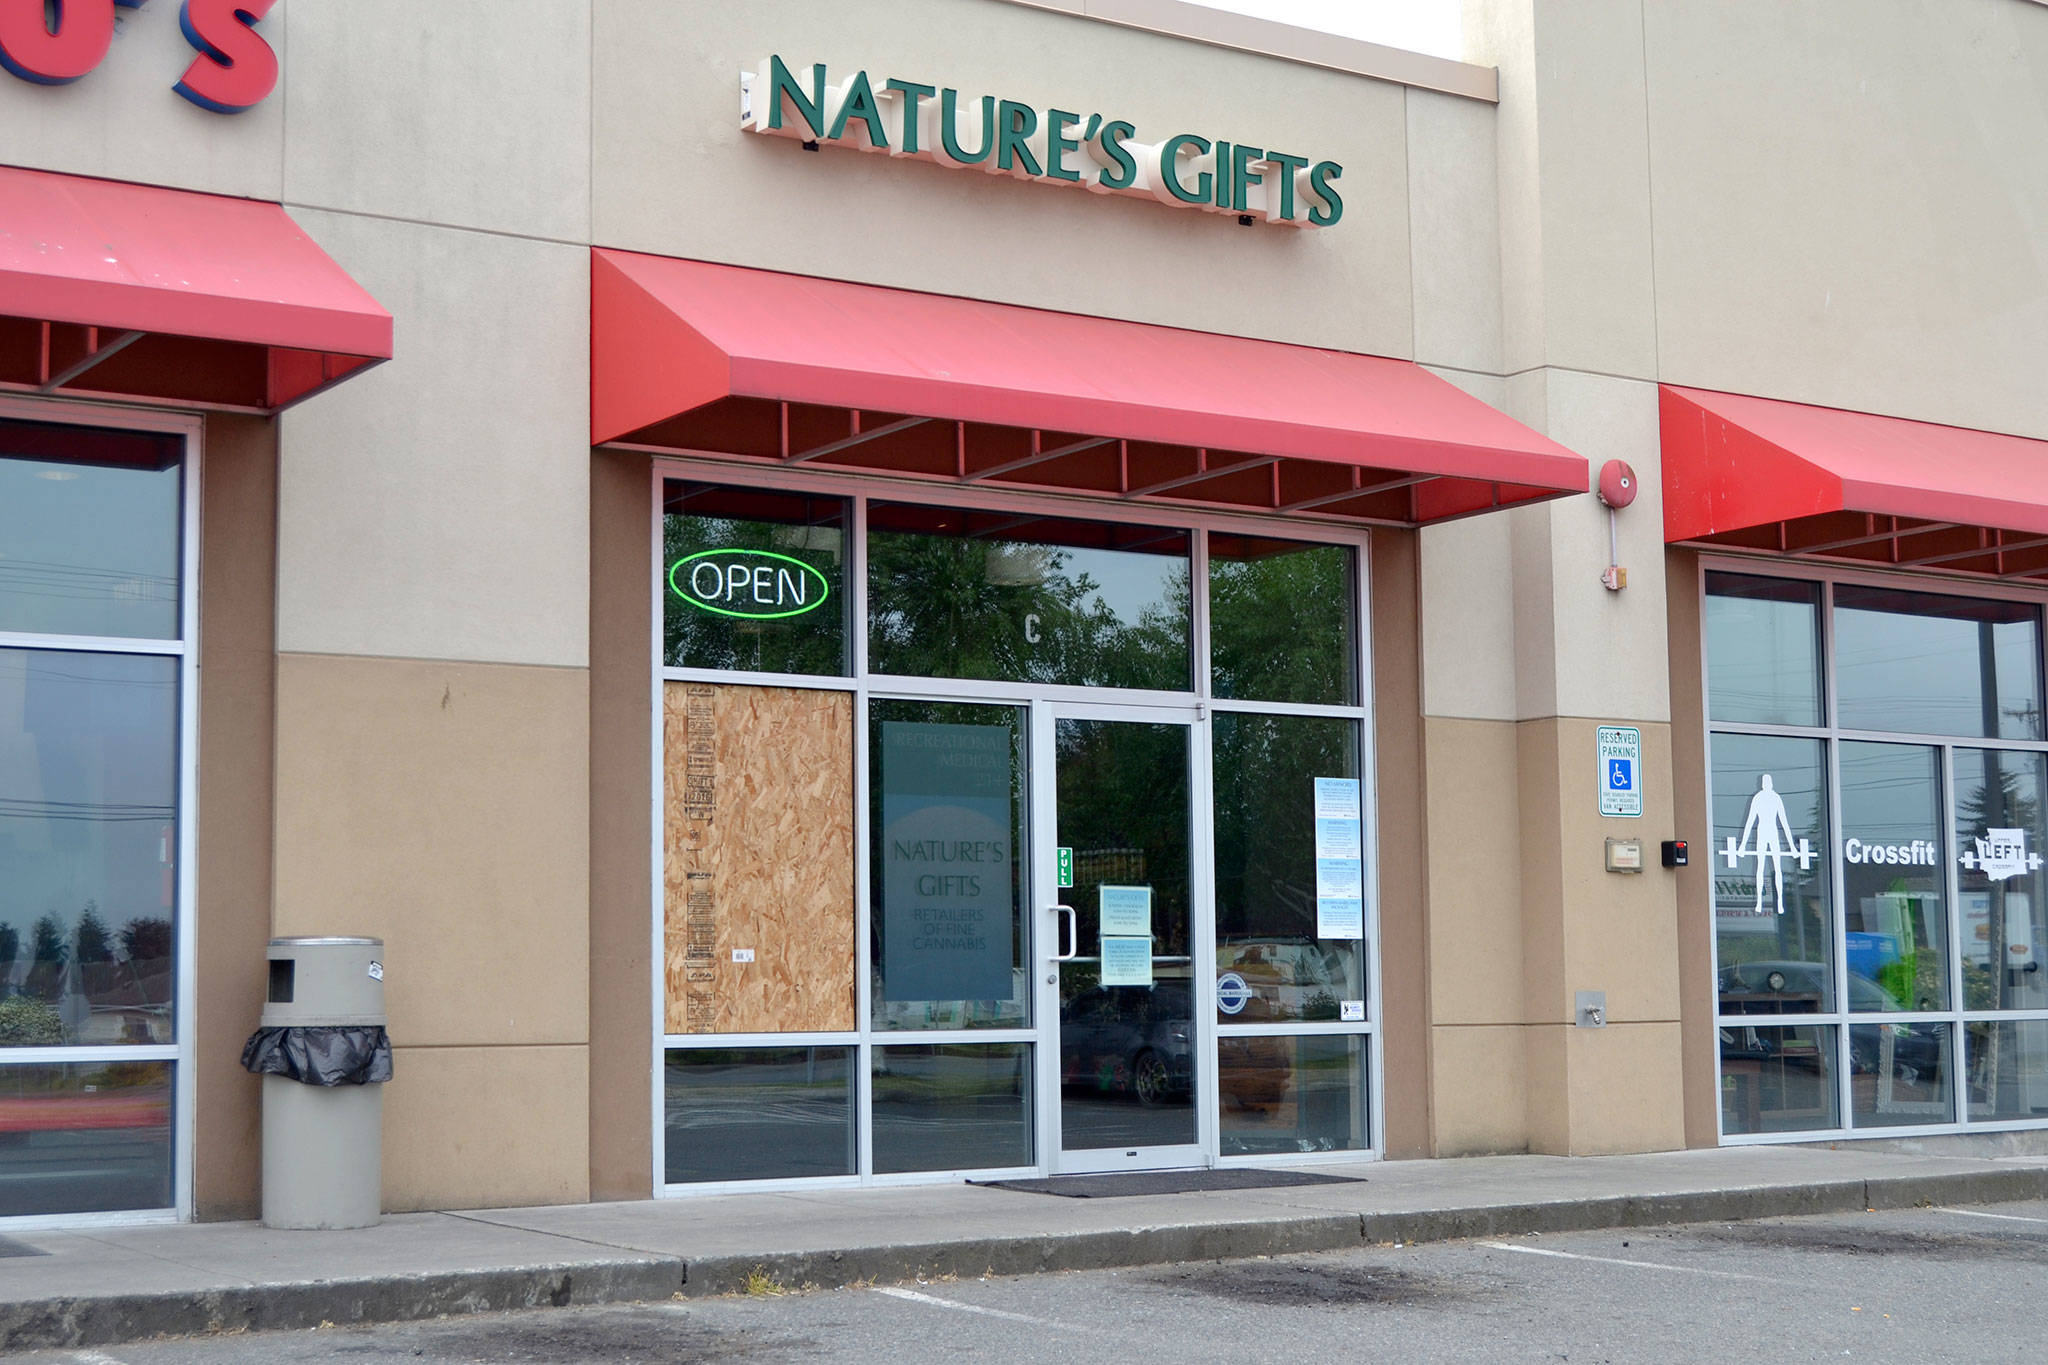 On May 10, three teens allegedly burglarized Nature’s Gifts marijuana dispensary to steal about $20 in rolling papers while causing about $350 in damage. Sequim Gazette photo by Matthew Nash